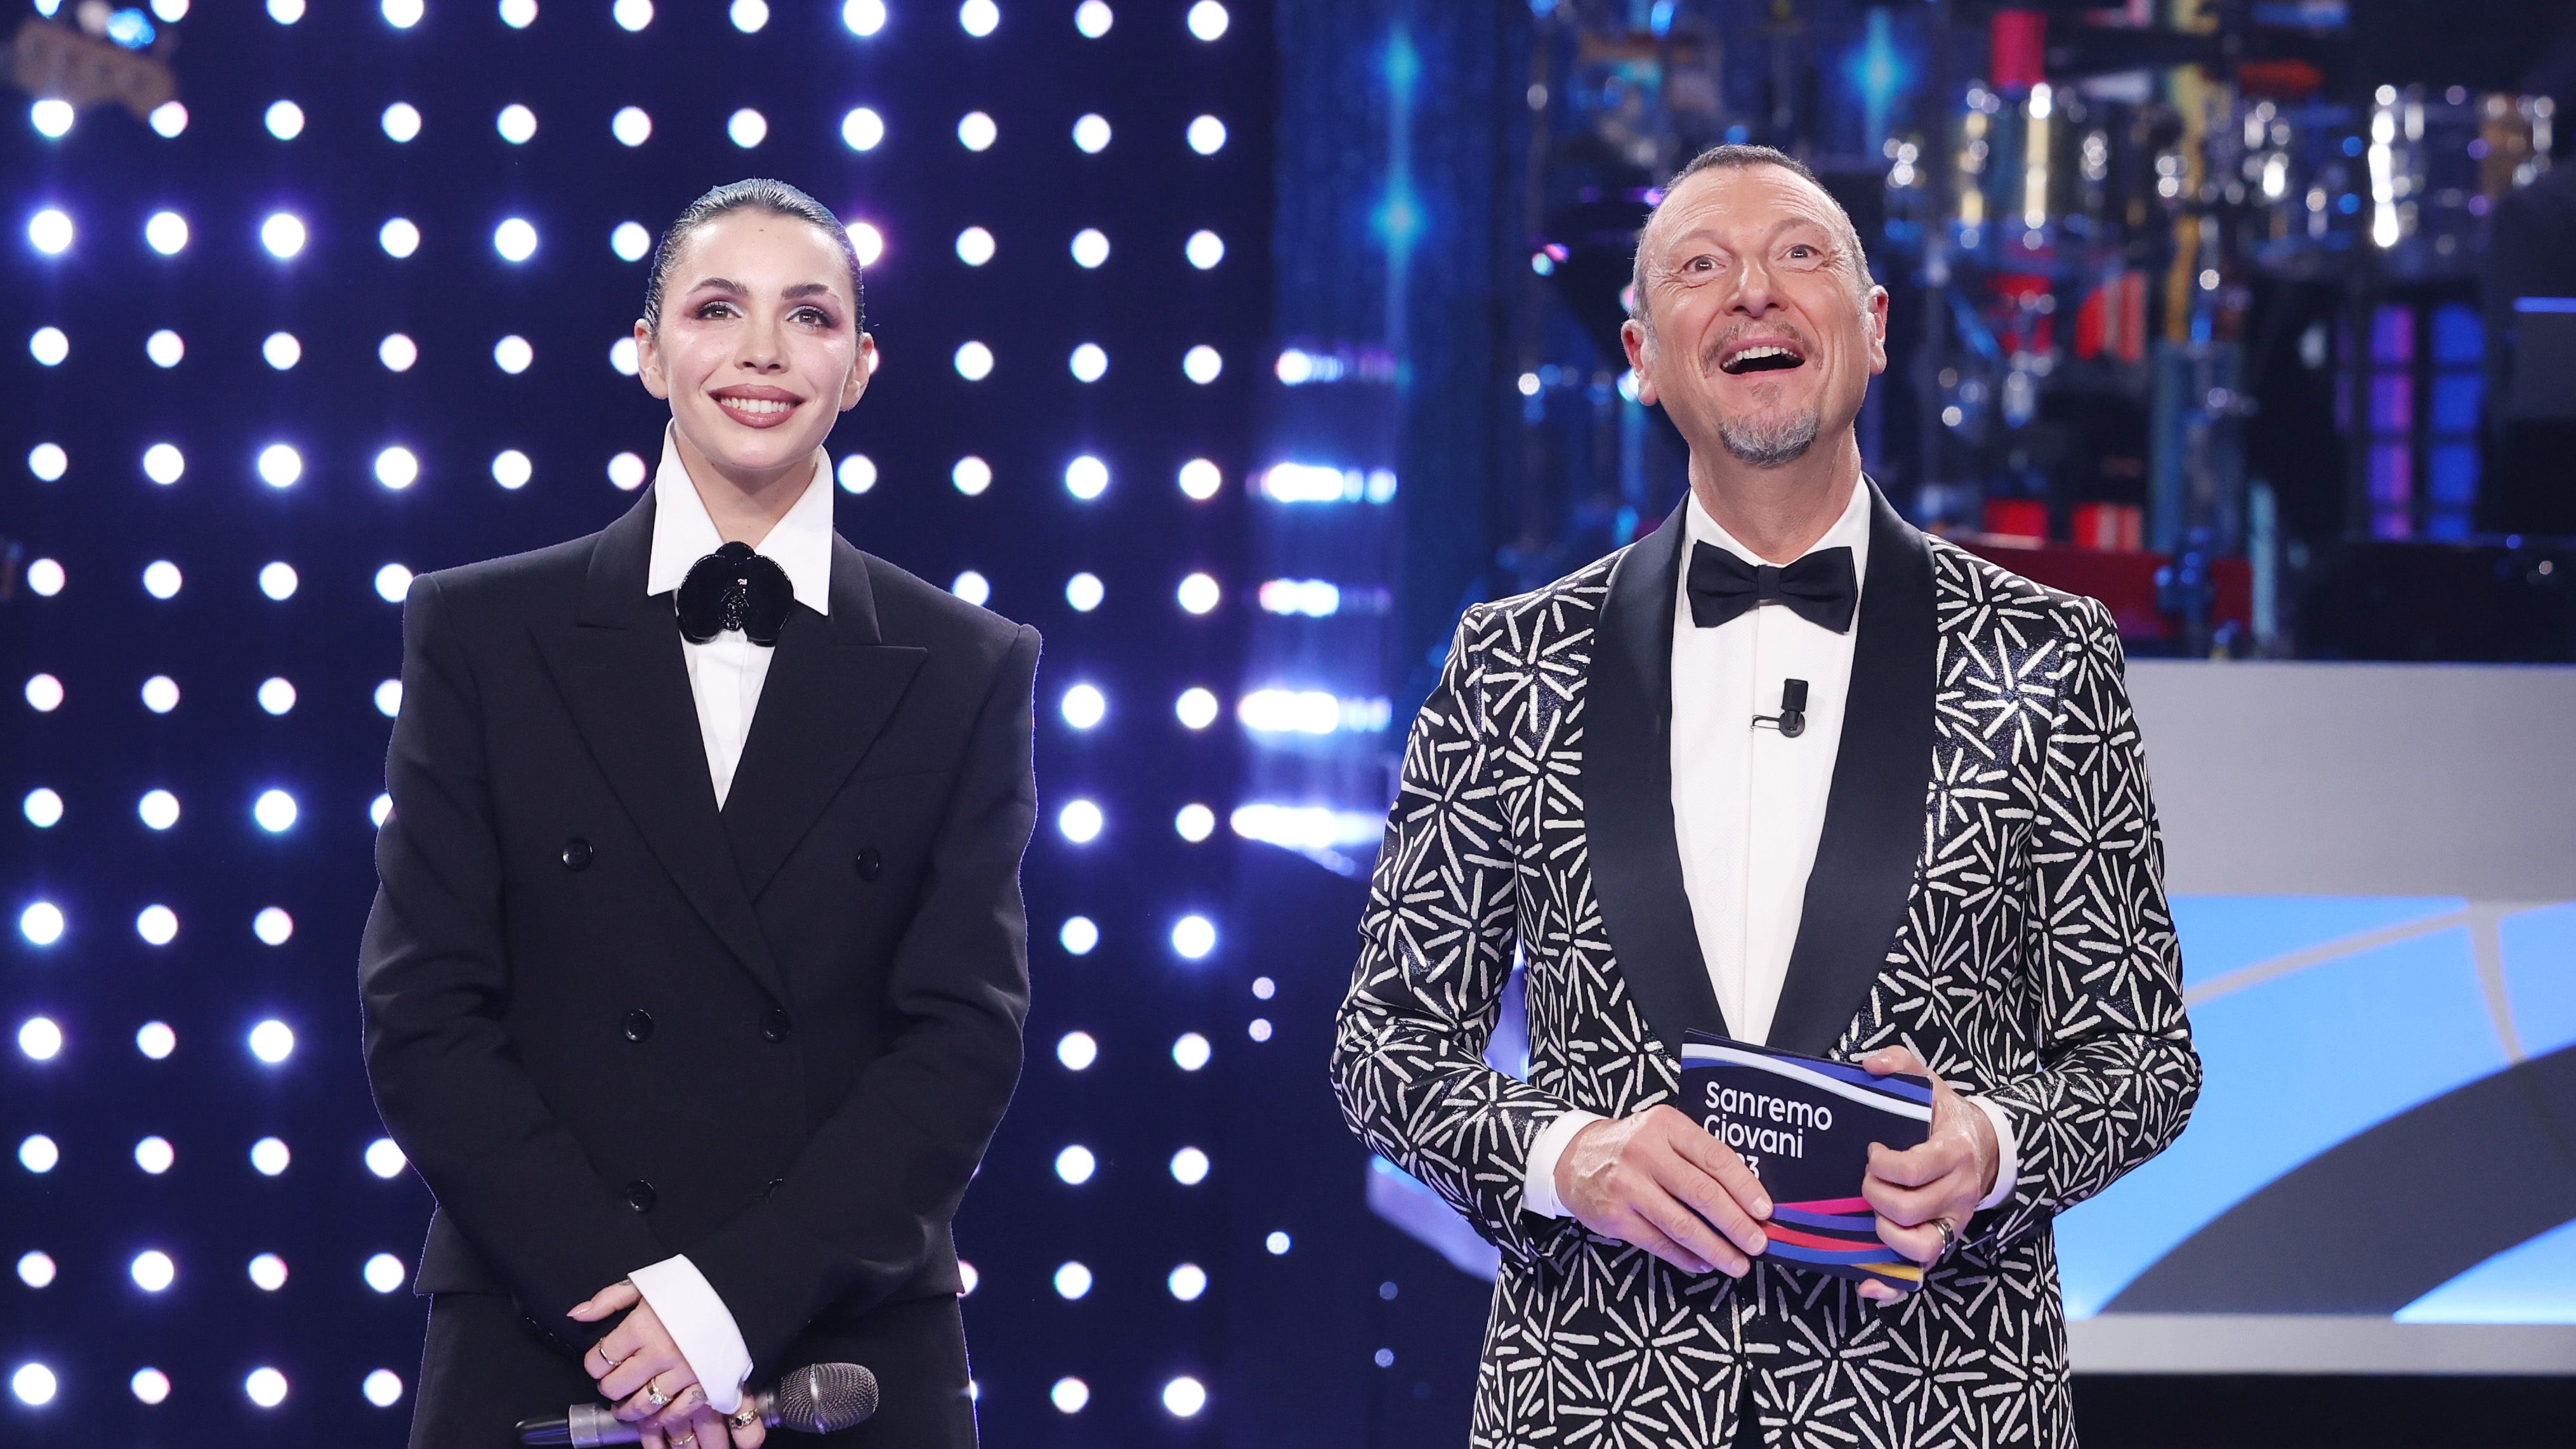 https://hips.hearstapps.com/hmg-prod/images/rose-villain-and-amadeus-attend-sanremo-giovani-2023-at-news-photo-1704298435.jpg?crop=1xw:0.84365xh;center,top